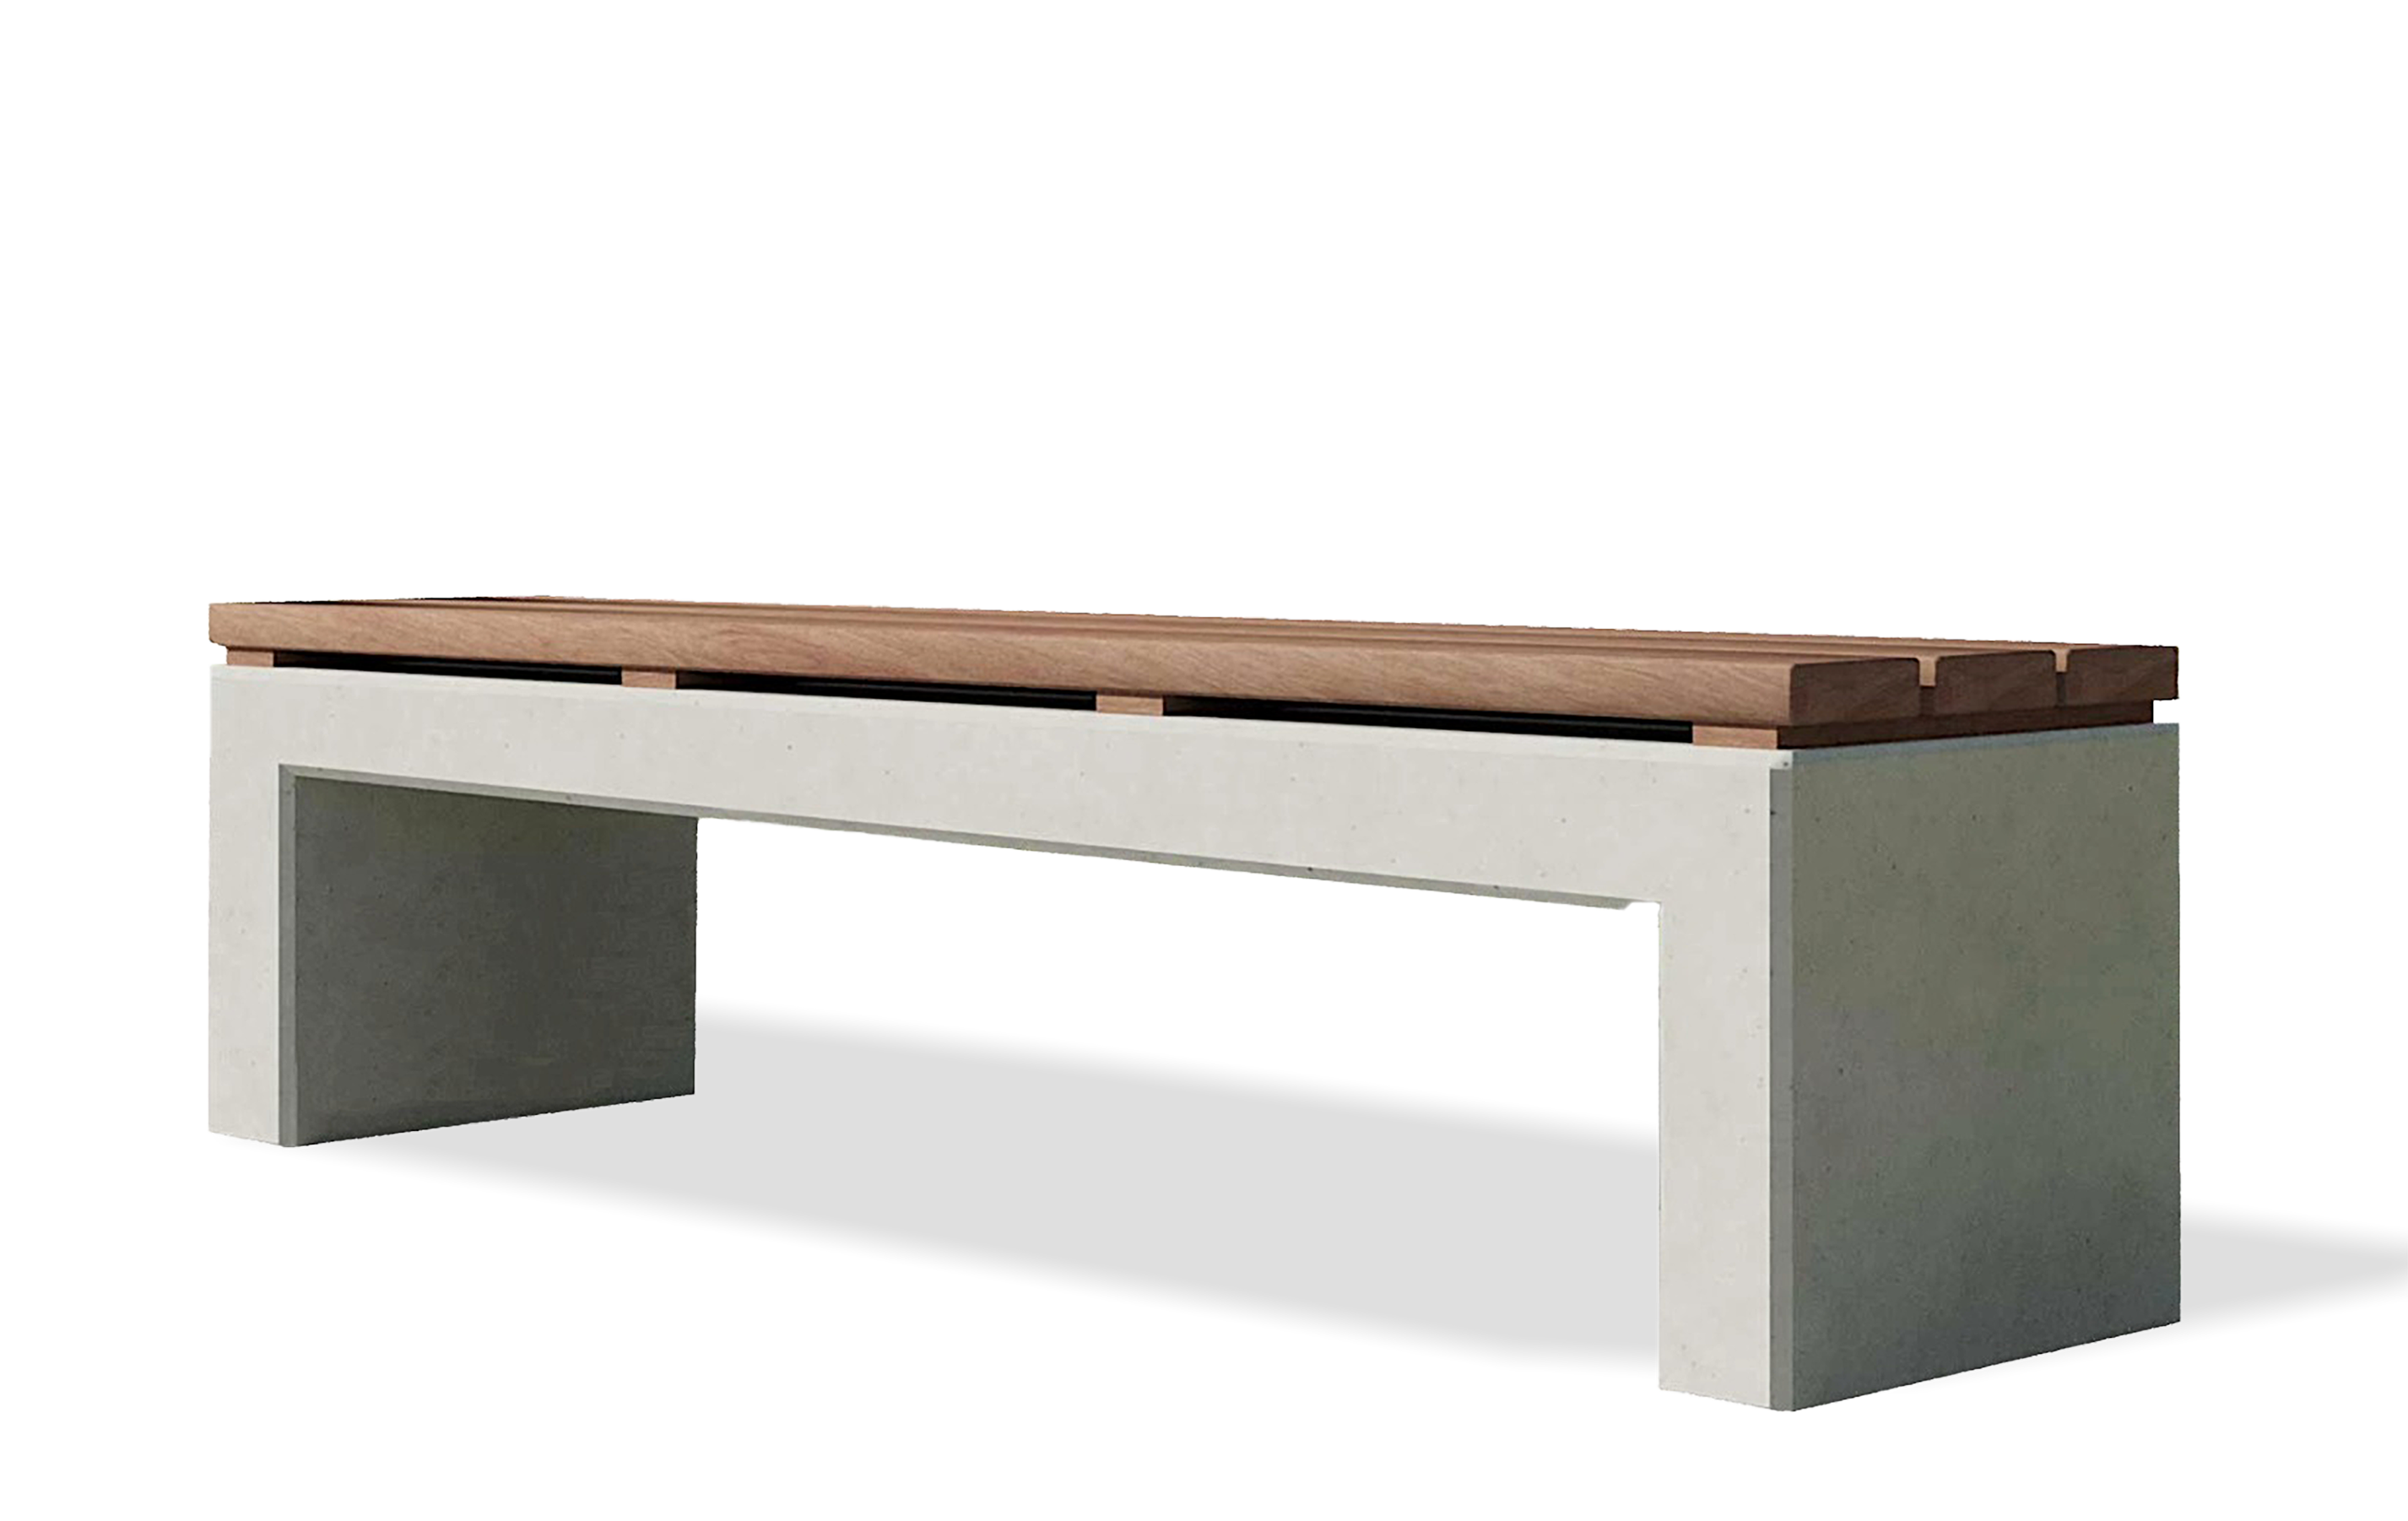 Pontis concrete bench with wooden support